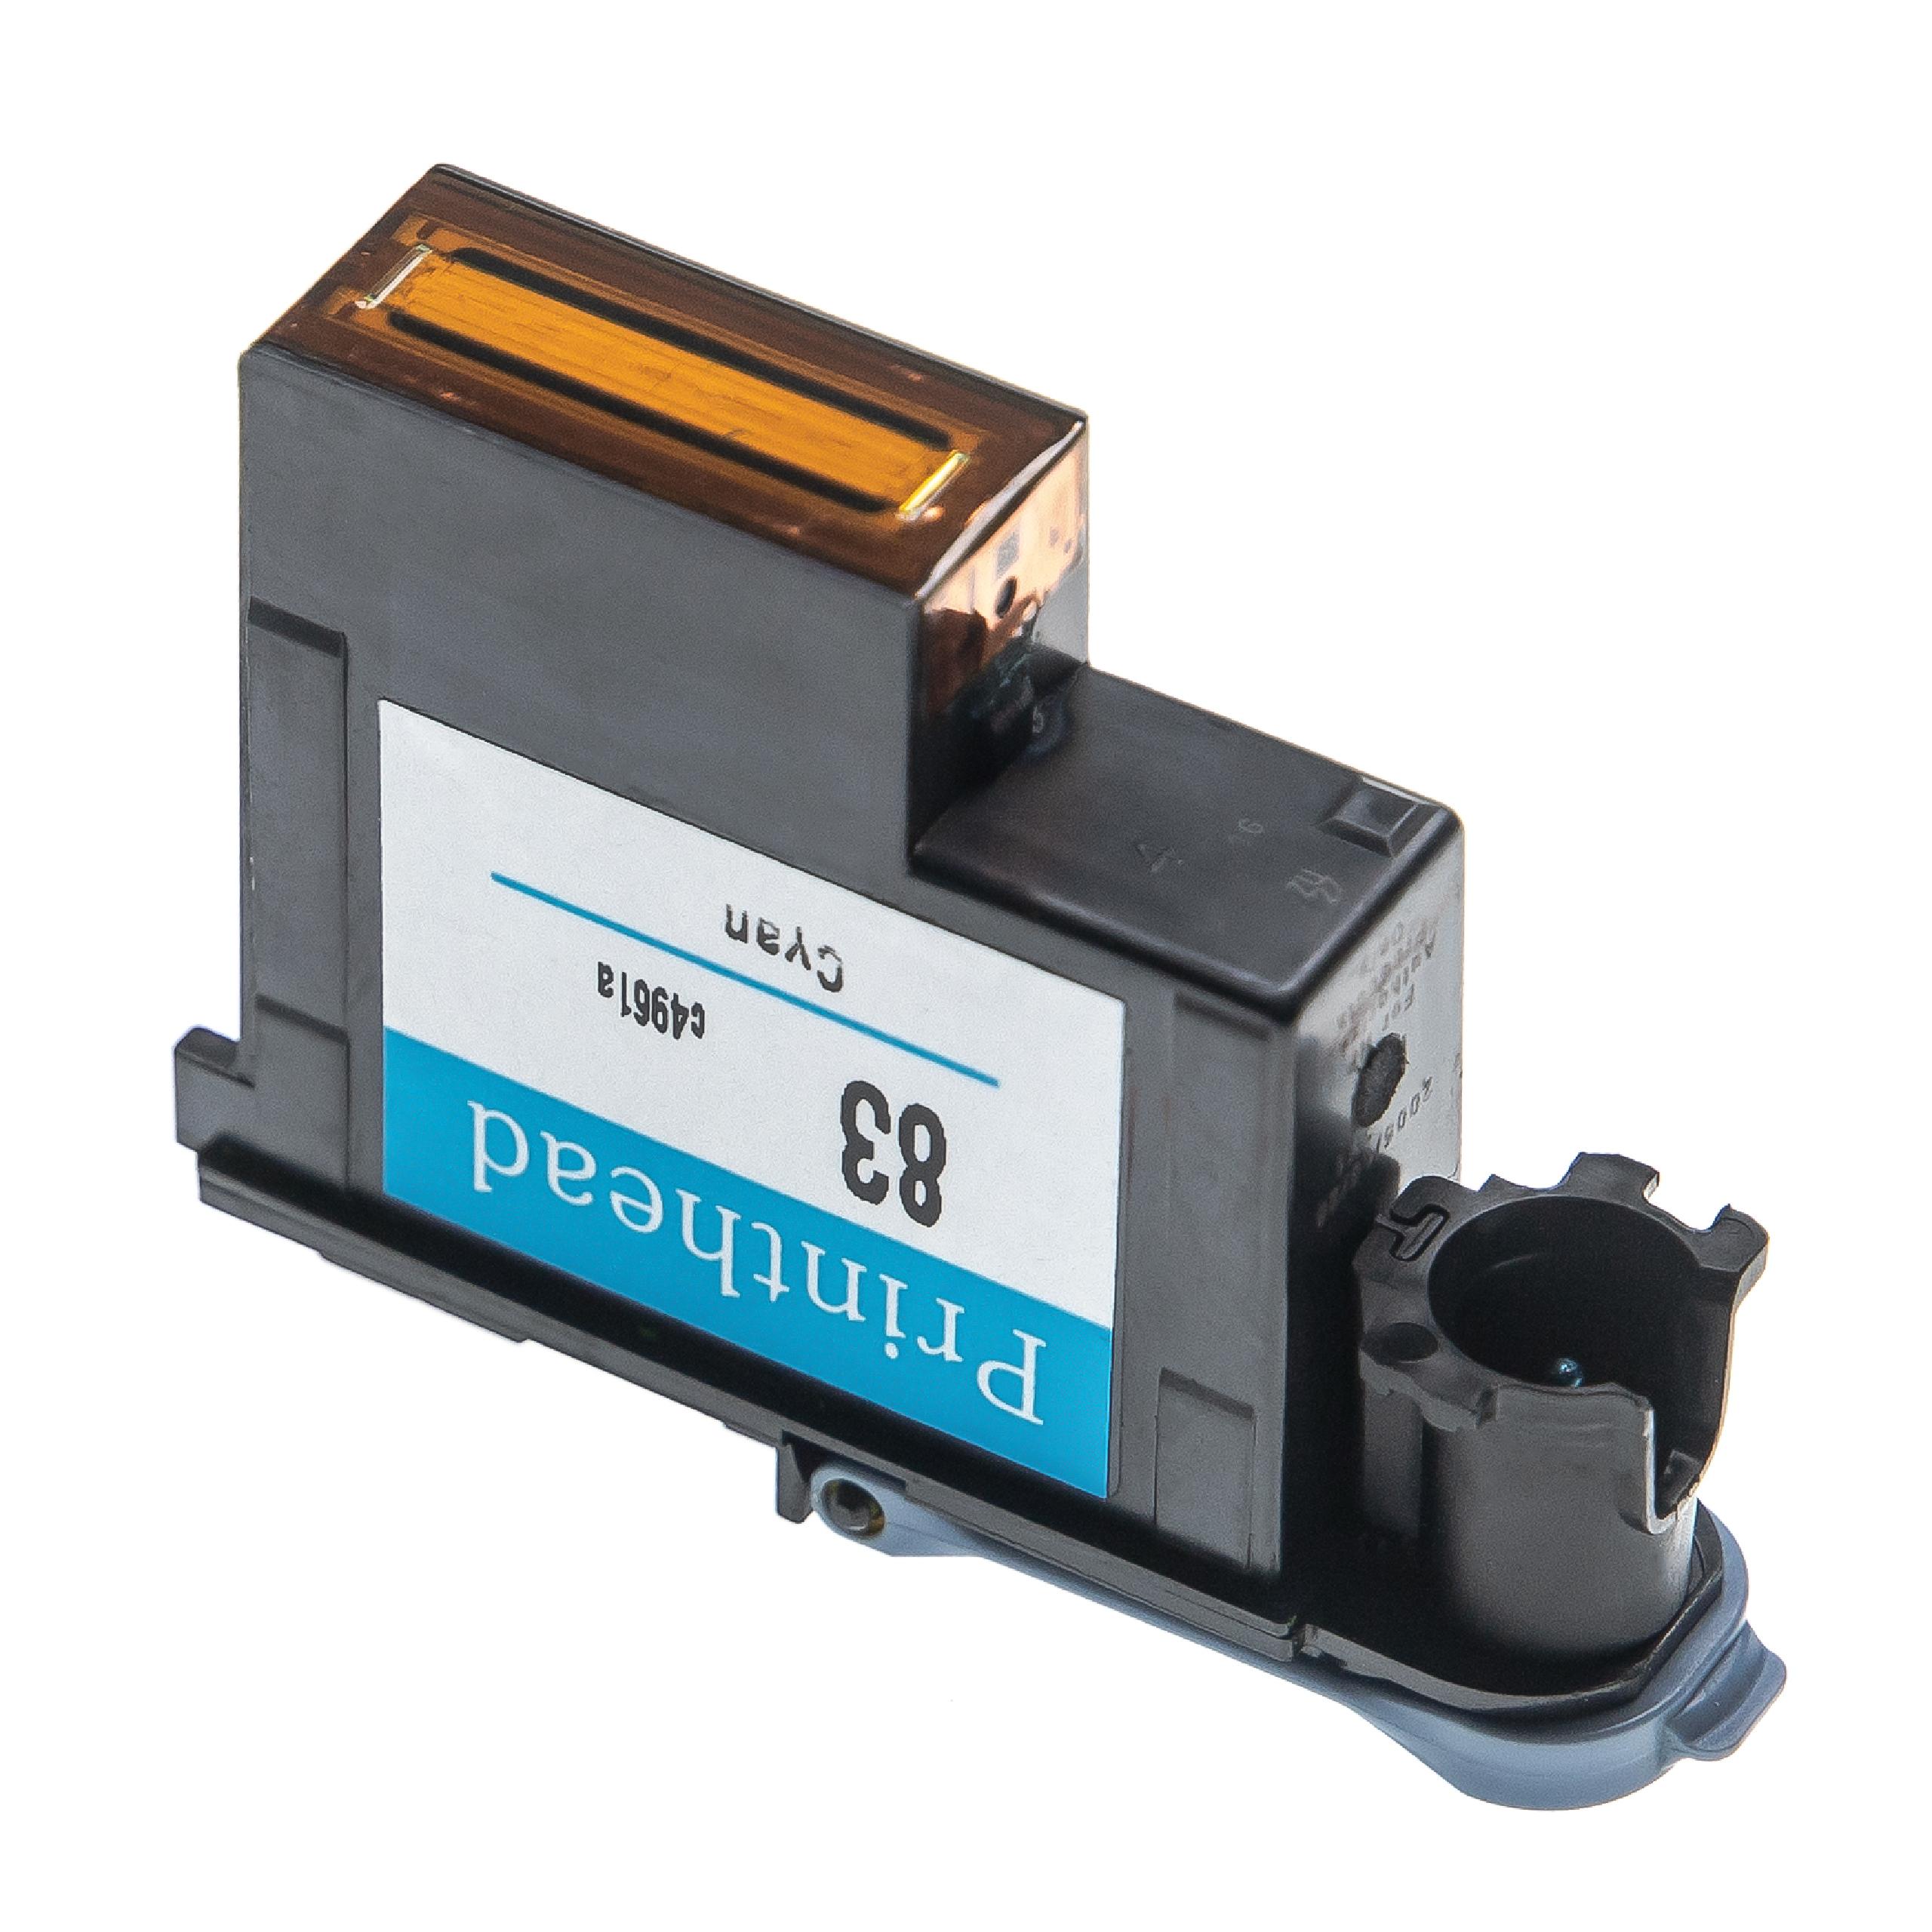 Printhead for HP DesignJet HP C4961A Printer - 13 ml, cyan, 6 cm wide, Refurbished, With Cleaner